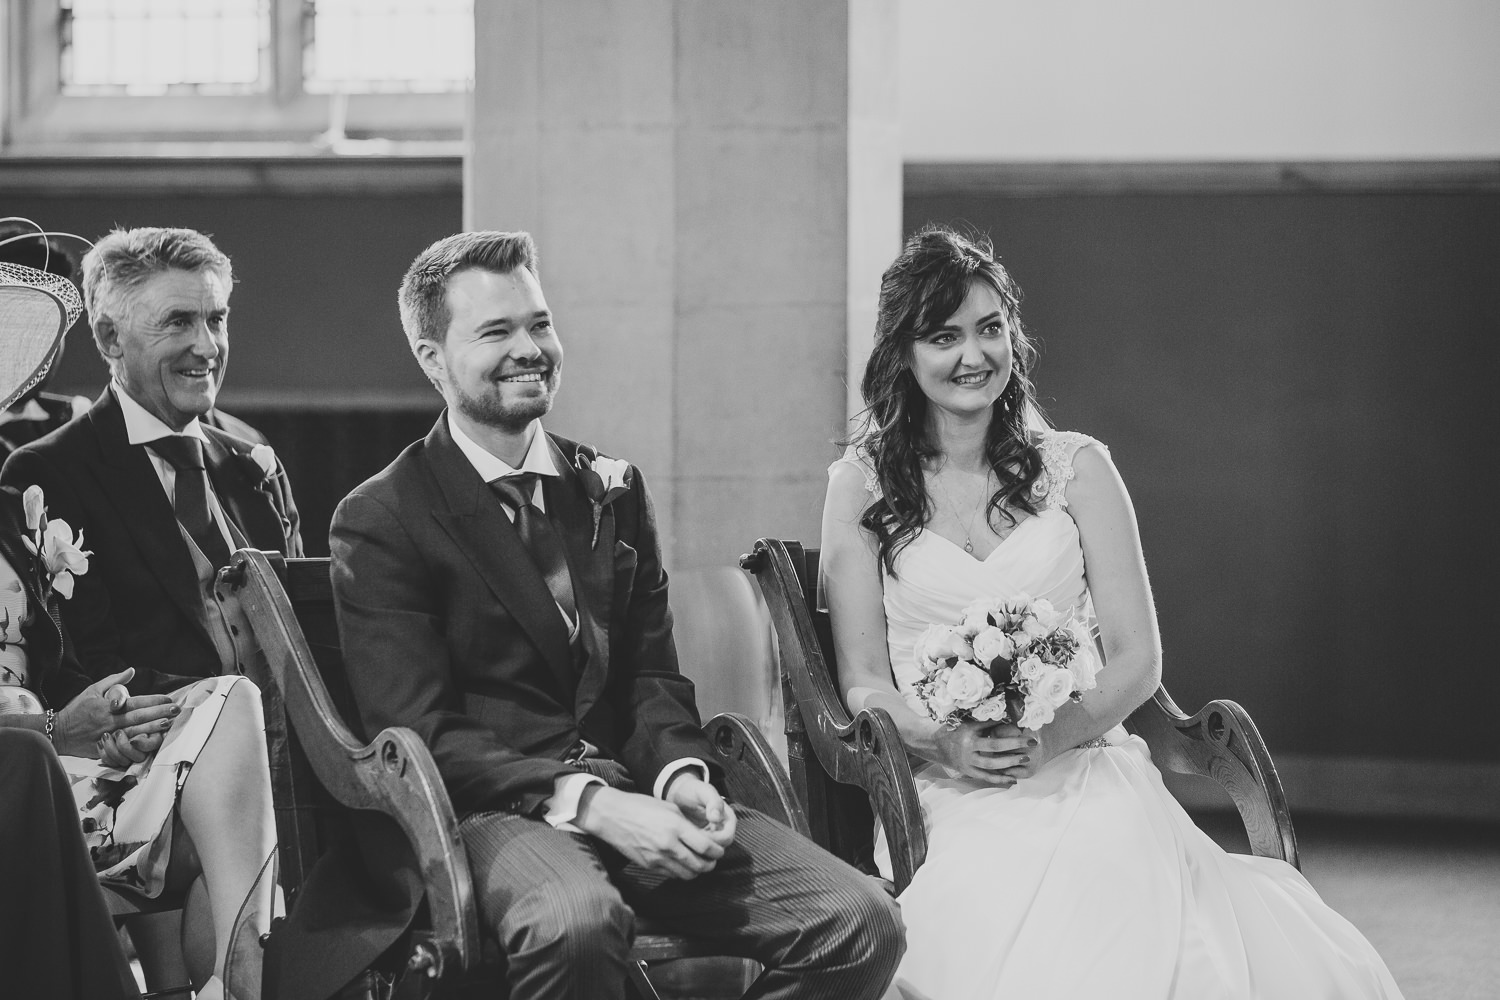 Black and white photo of bride and groom looking happy during the wedding ceremony